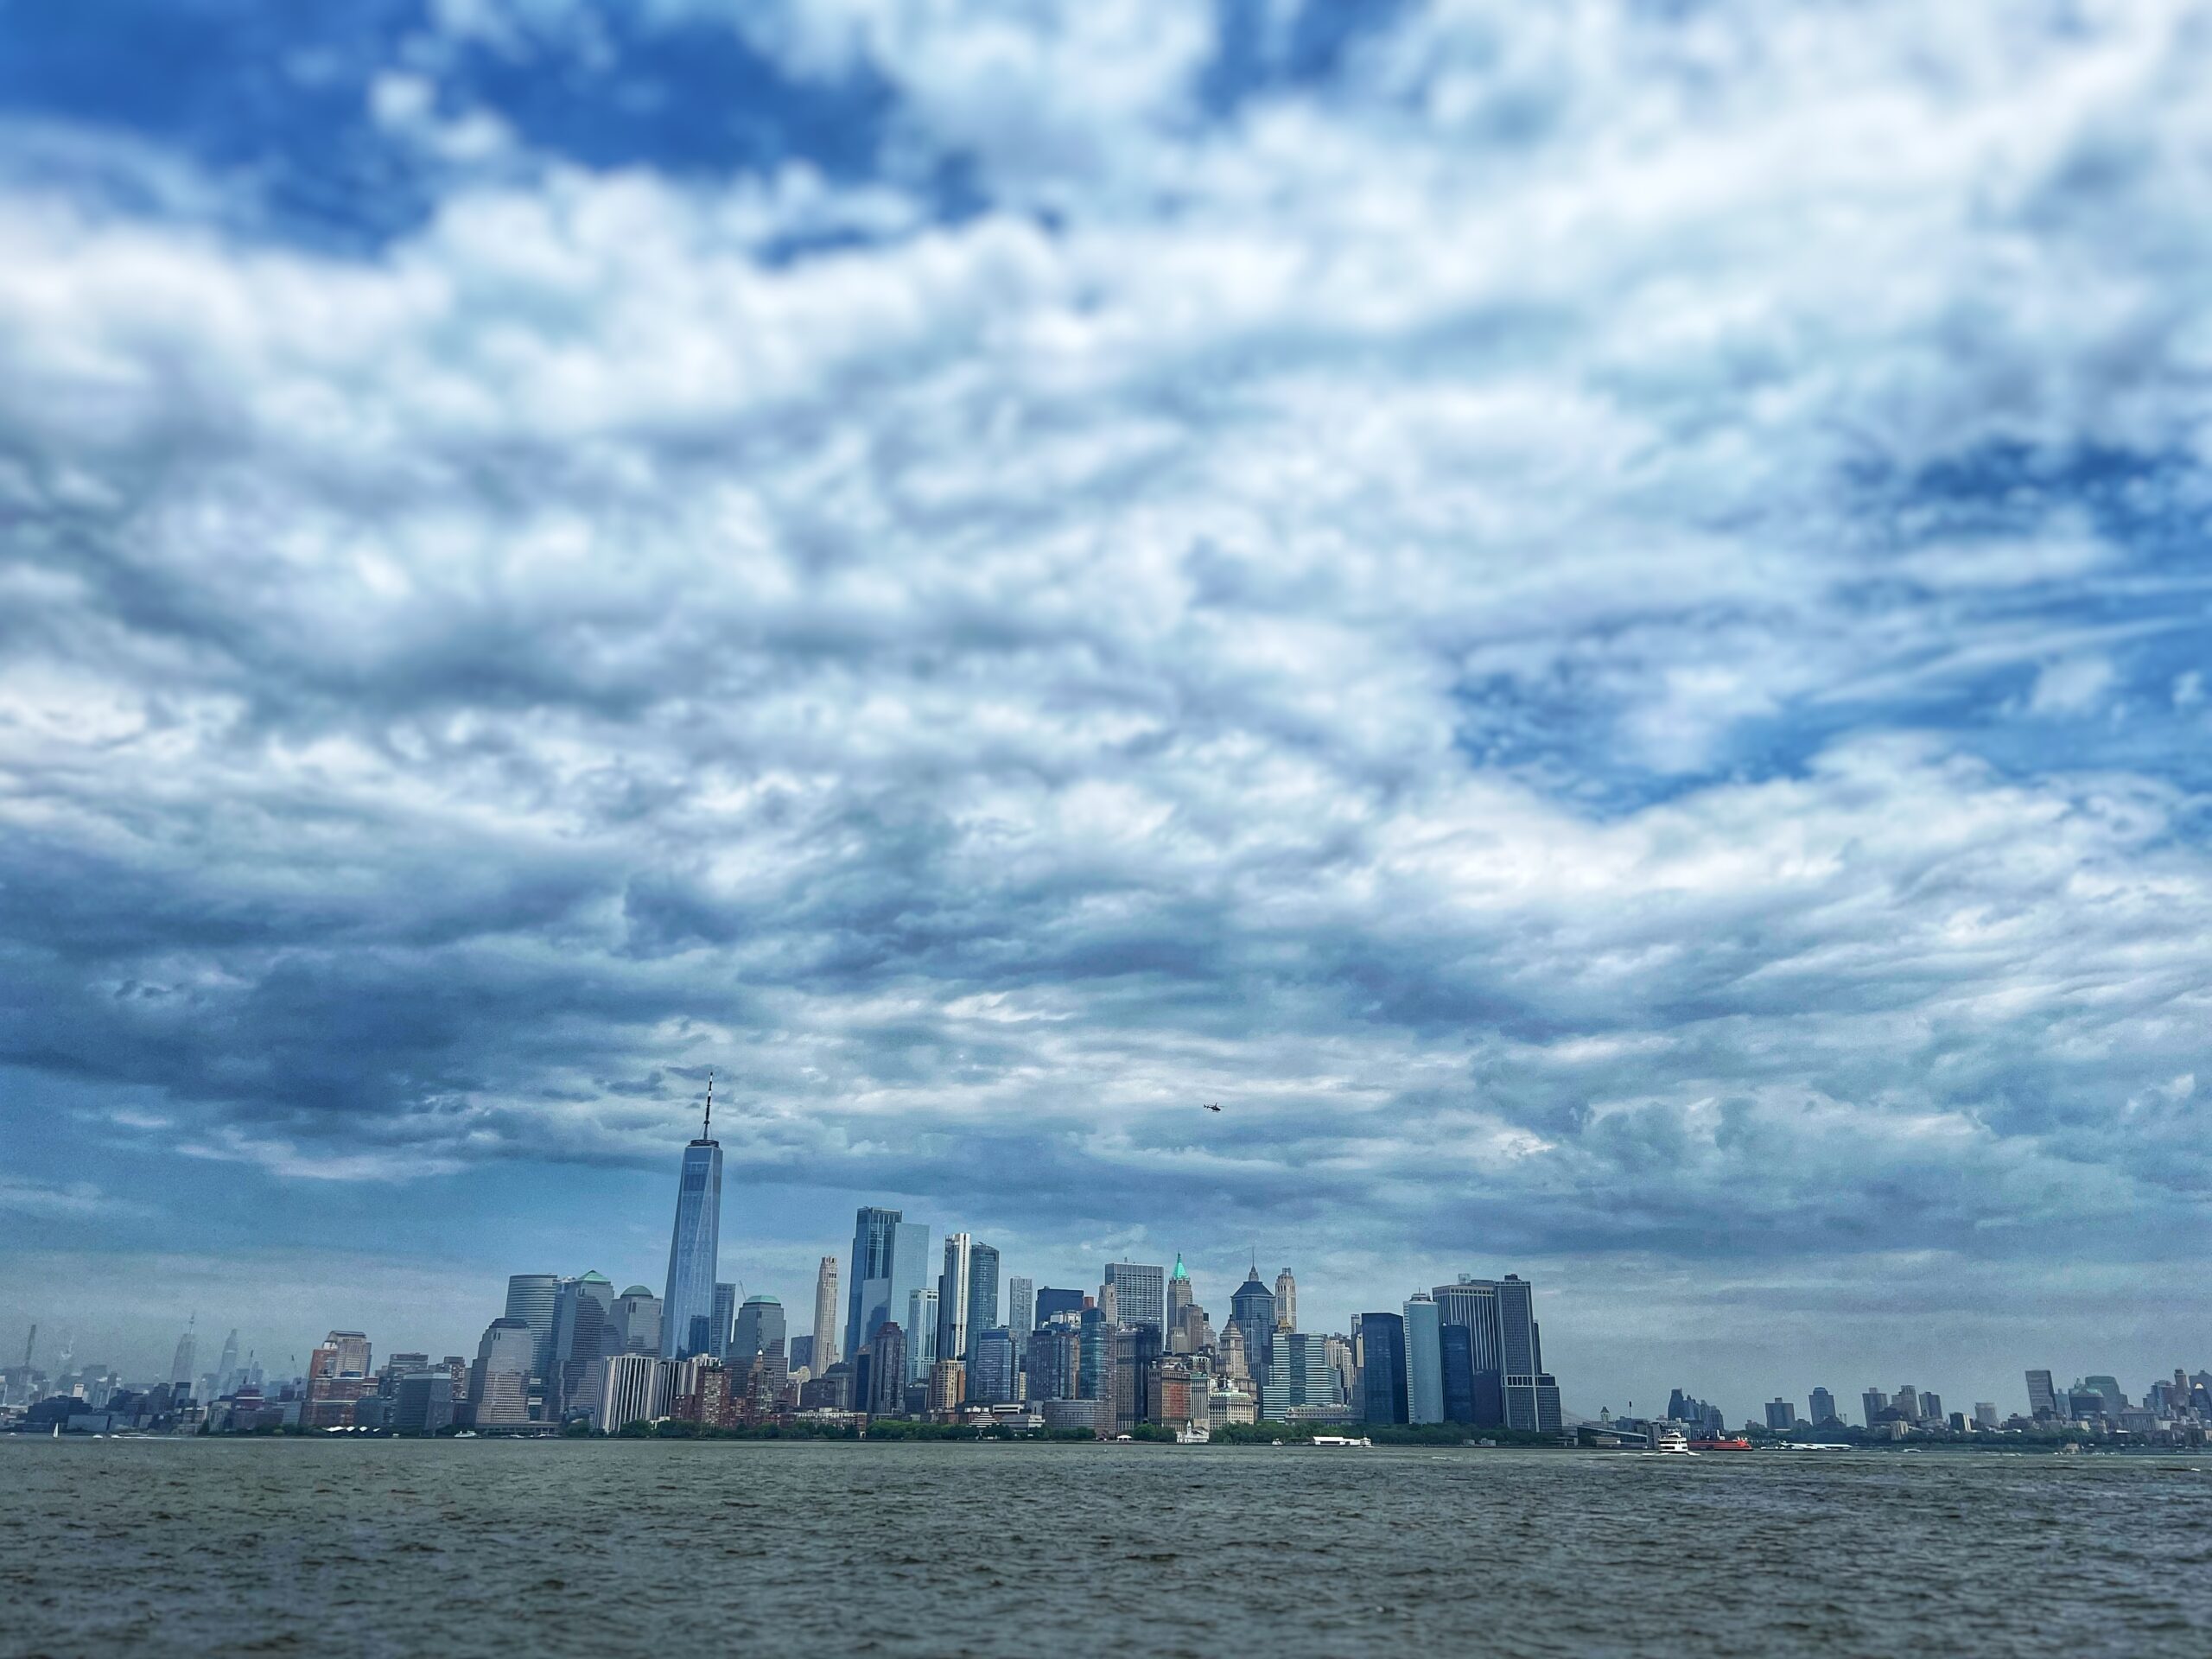 Skyline of New York City from the ferry on a cloudy day. 